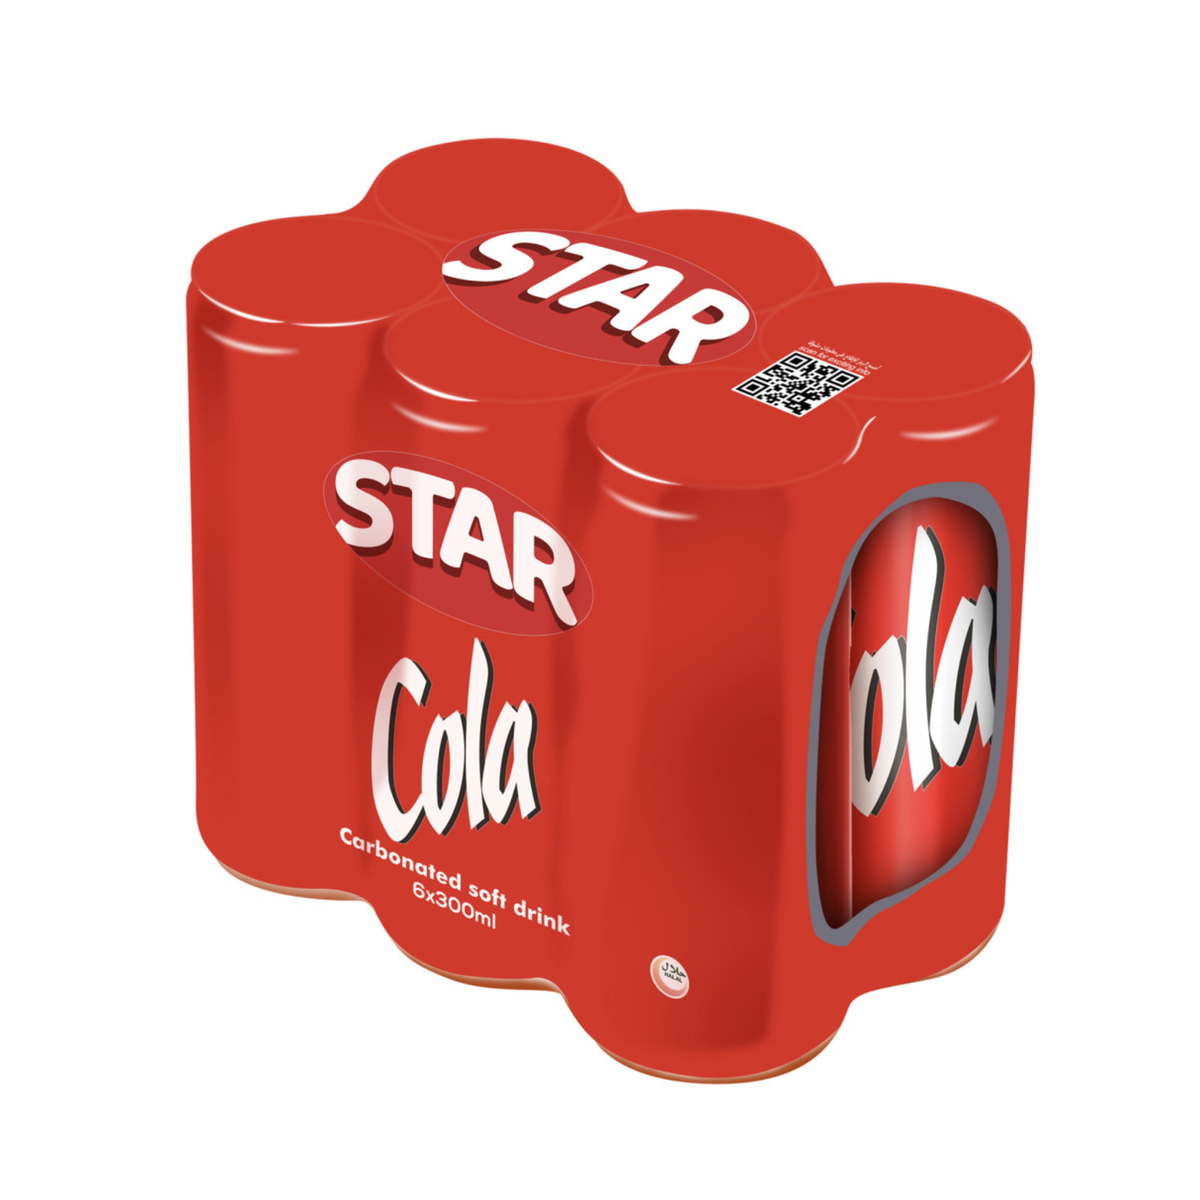 Star Cola Carbonated Soft Drink 6 x 300 ml